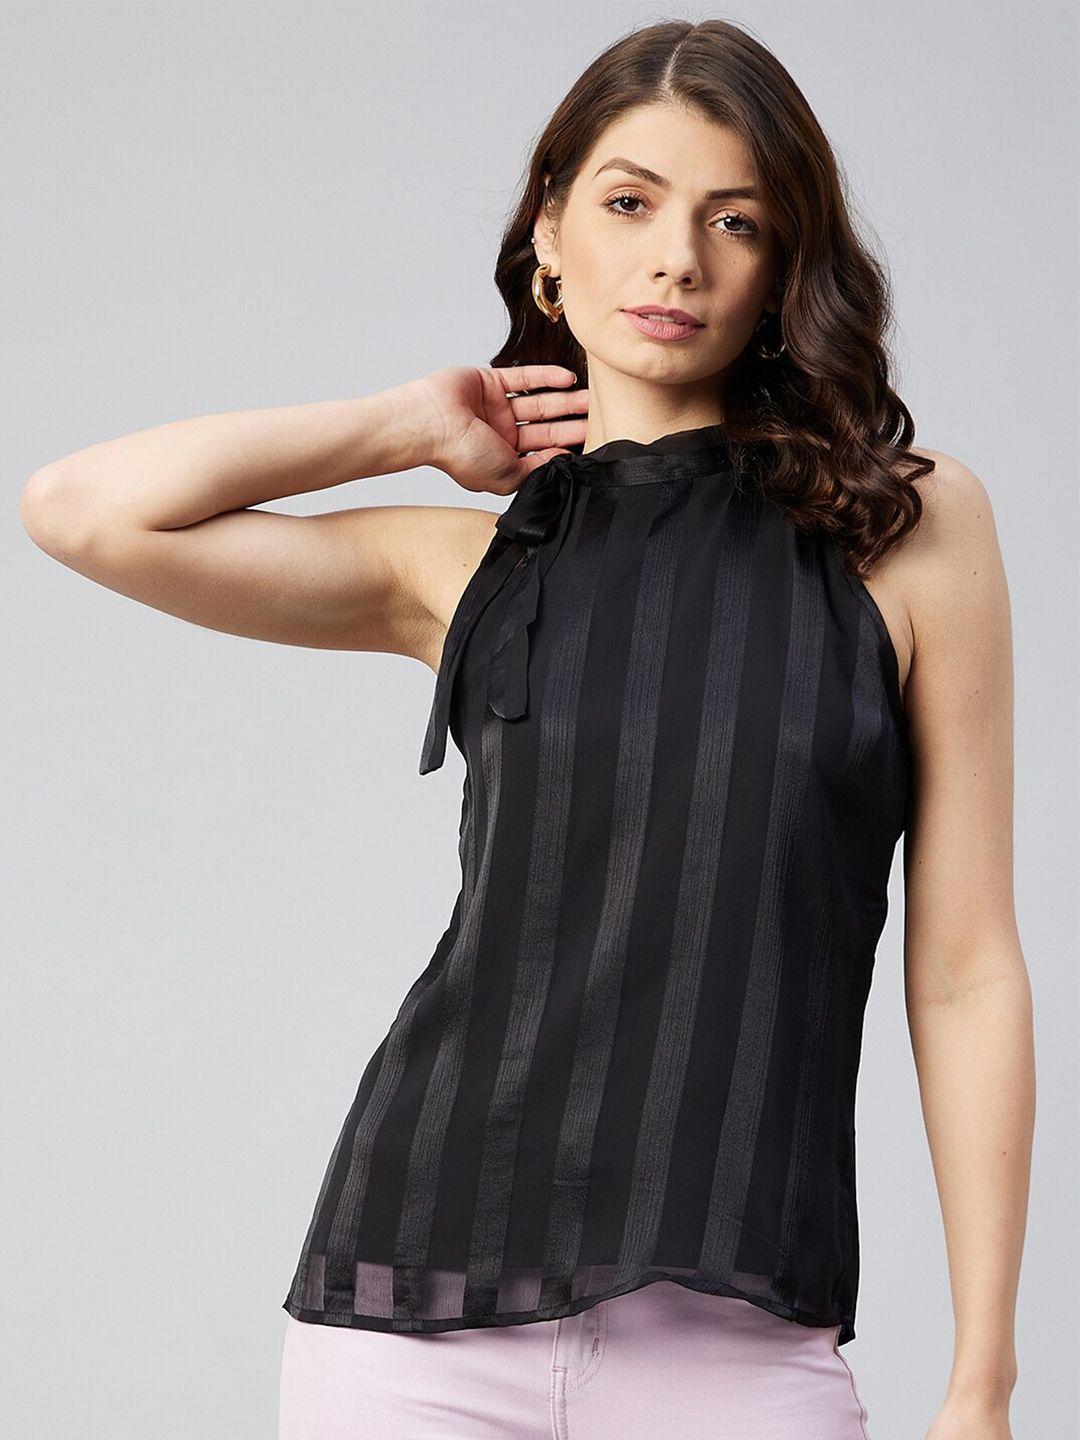 marie claire black self striped tie-up neck chiffon top